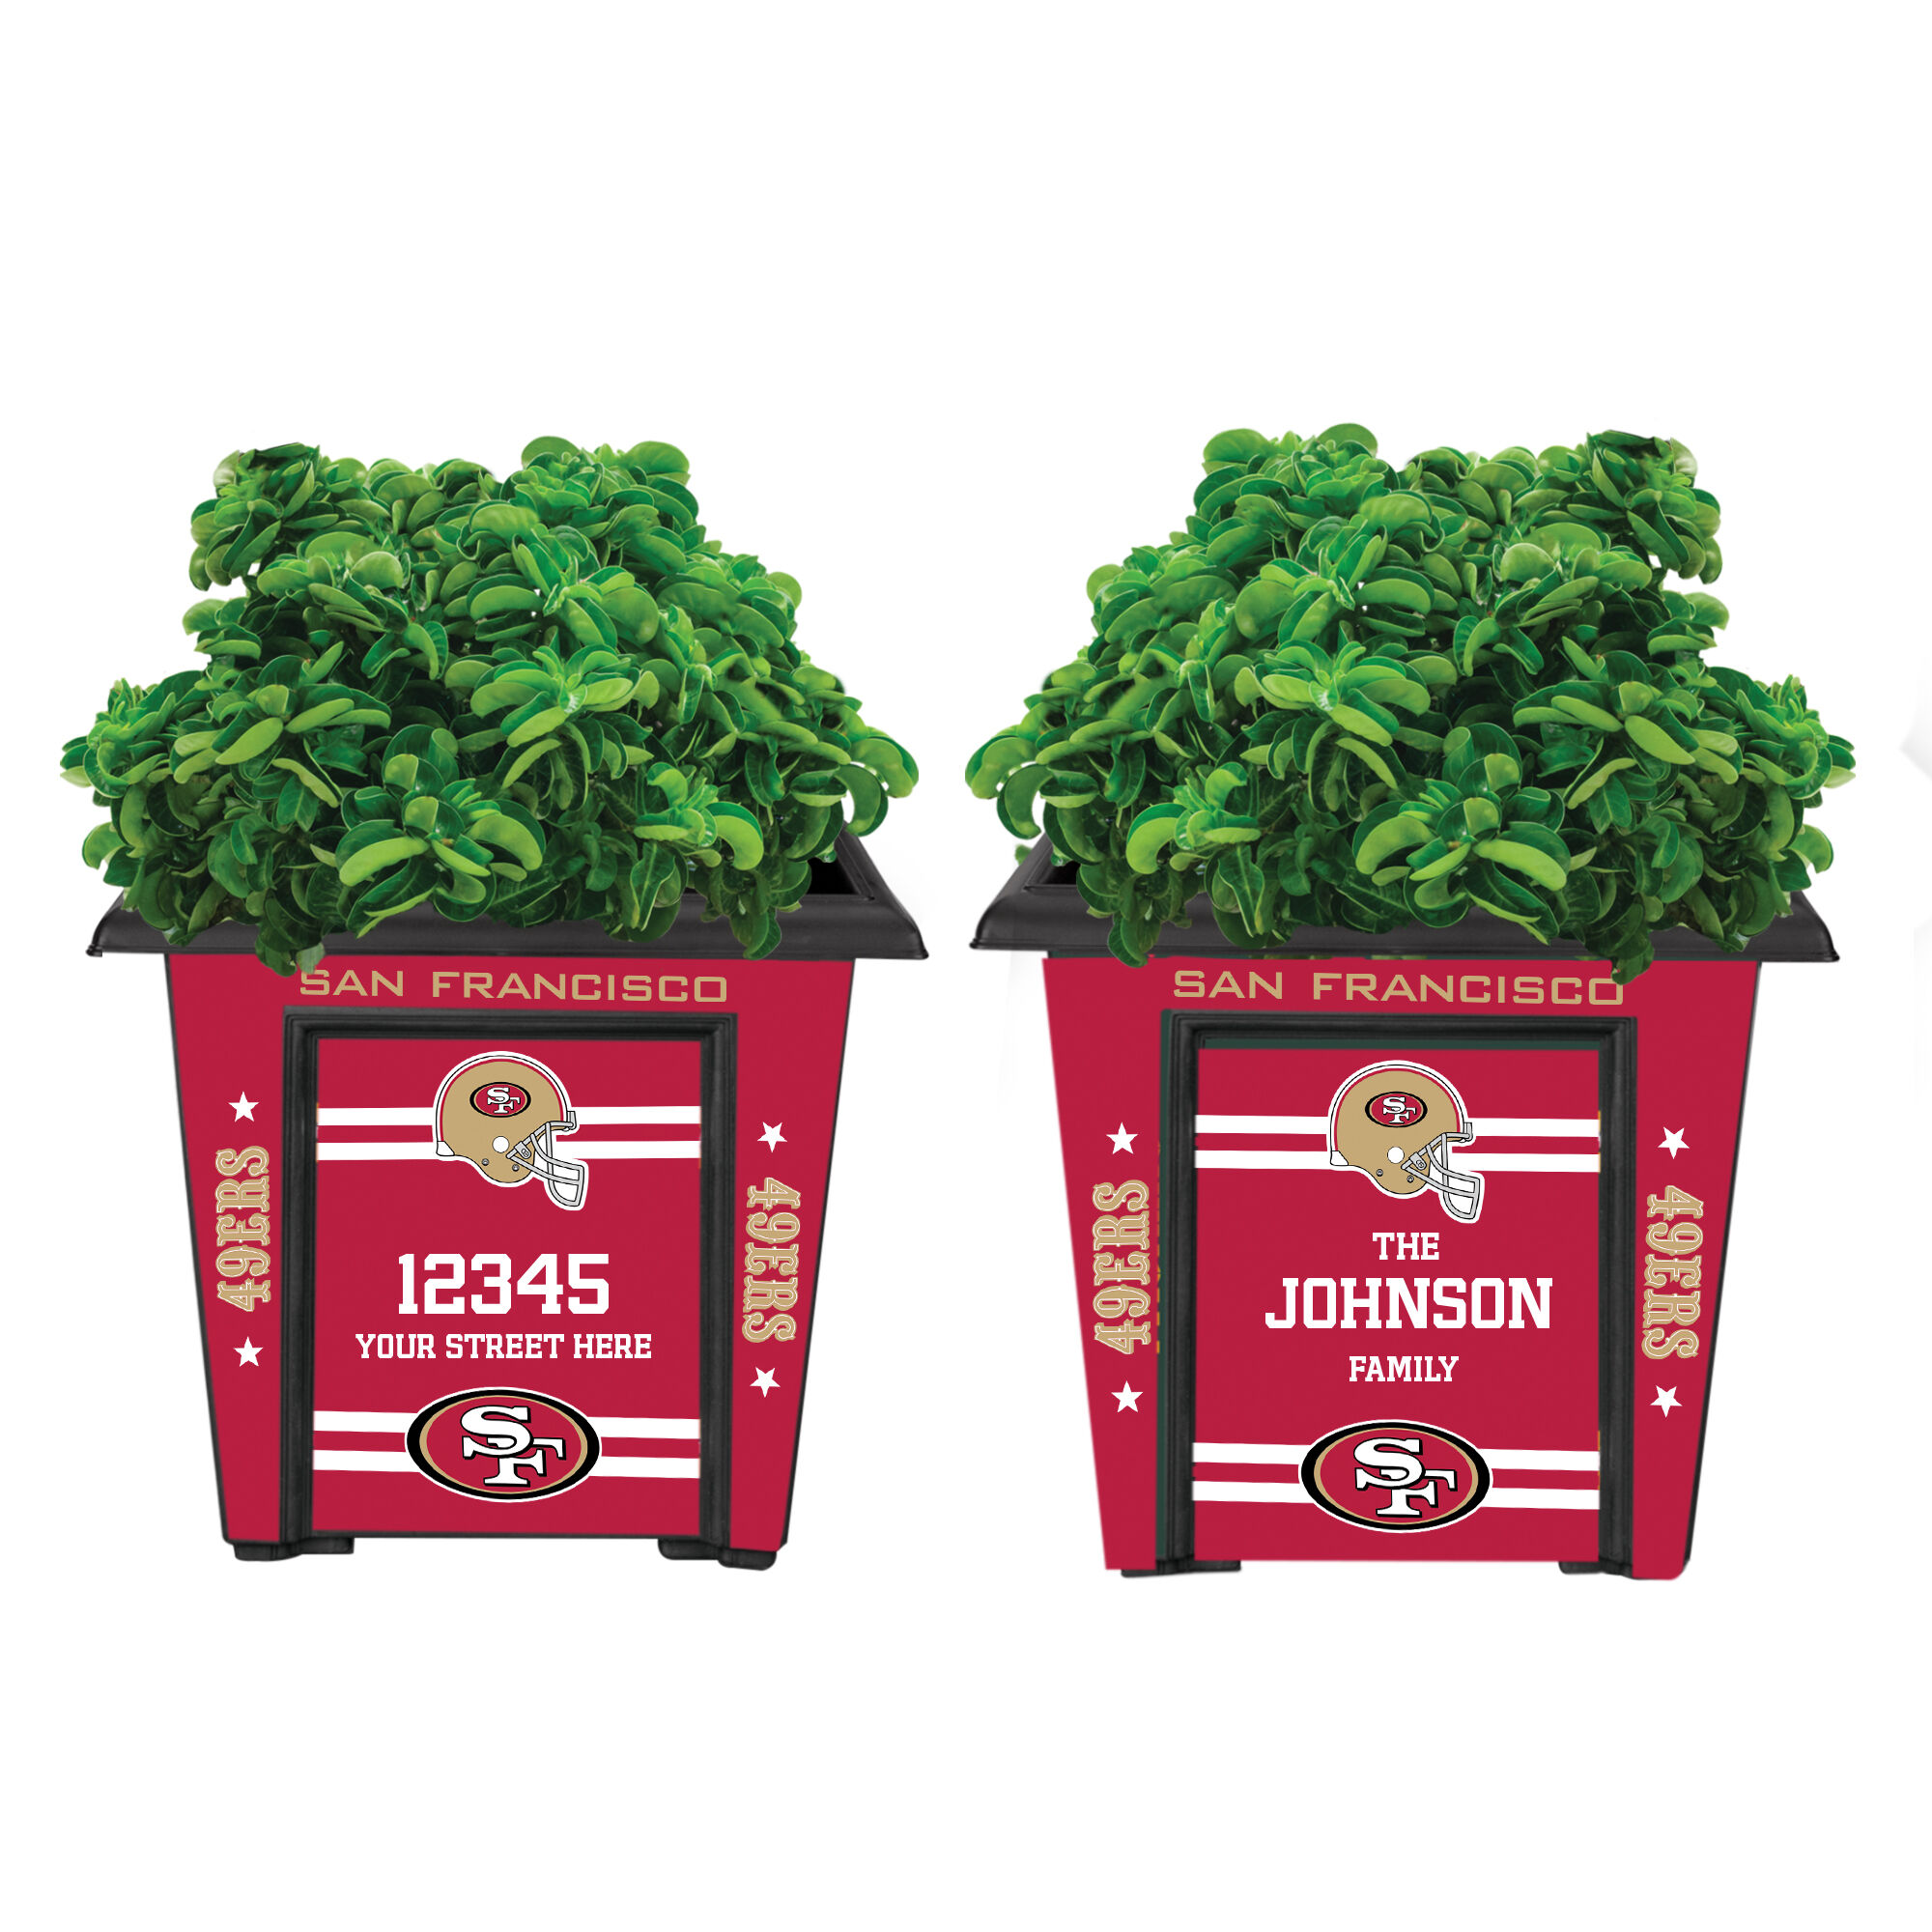 The NFL Personalized Planters 1929 0048 a 49ers